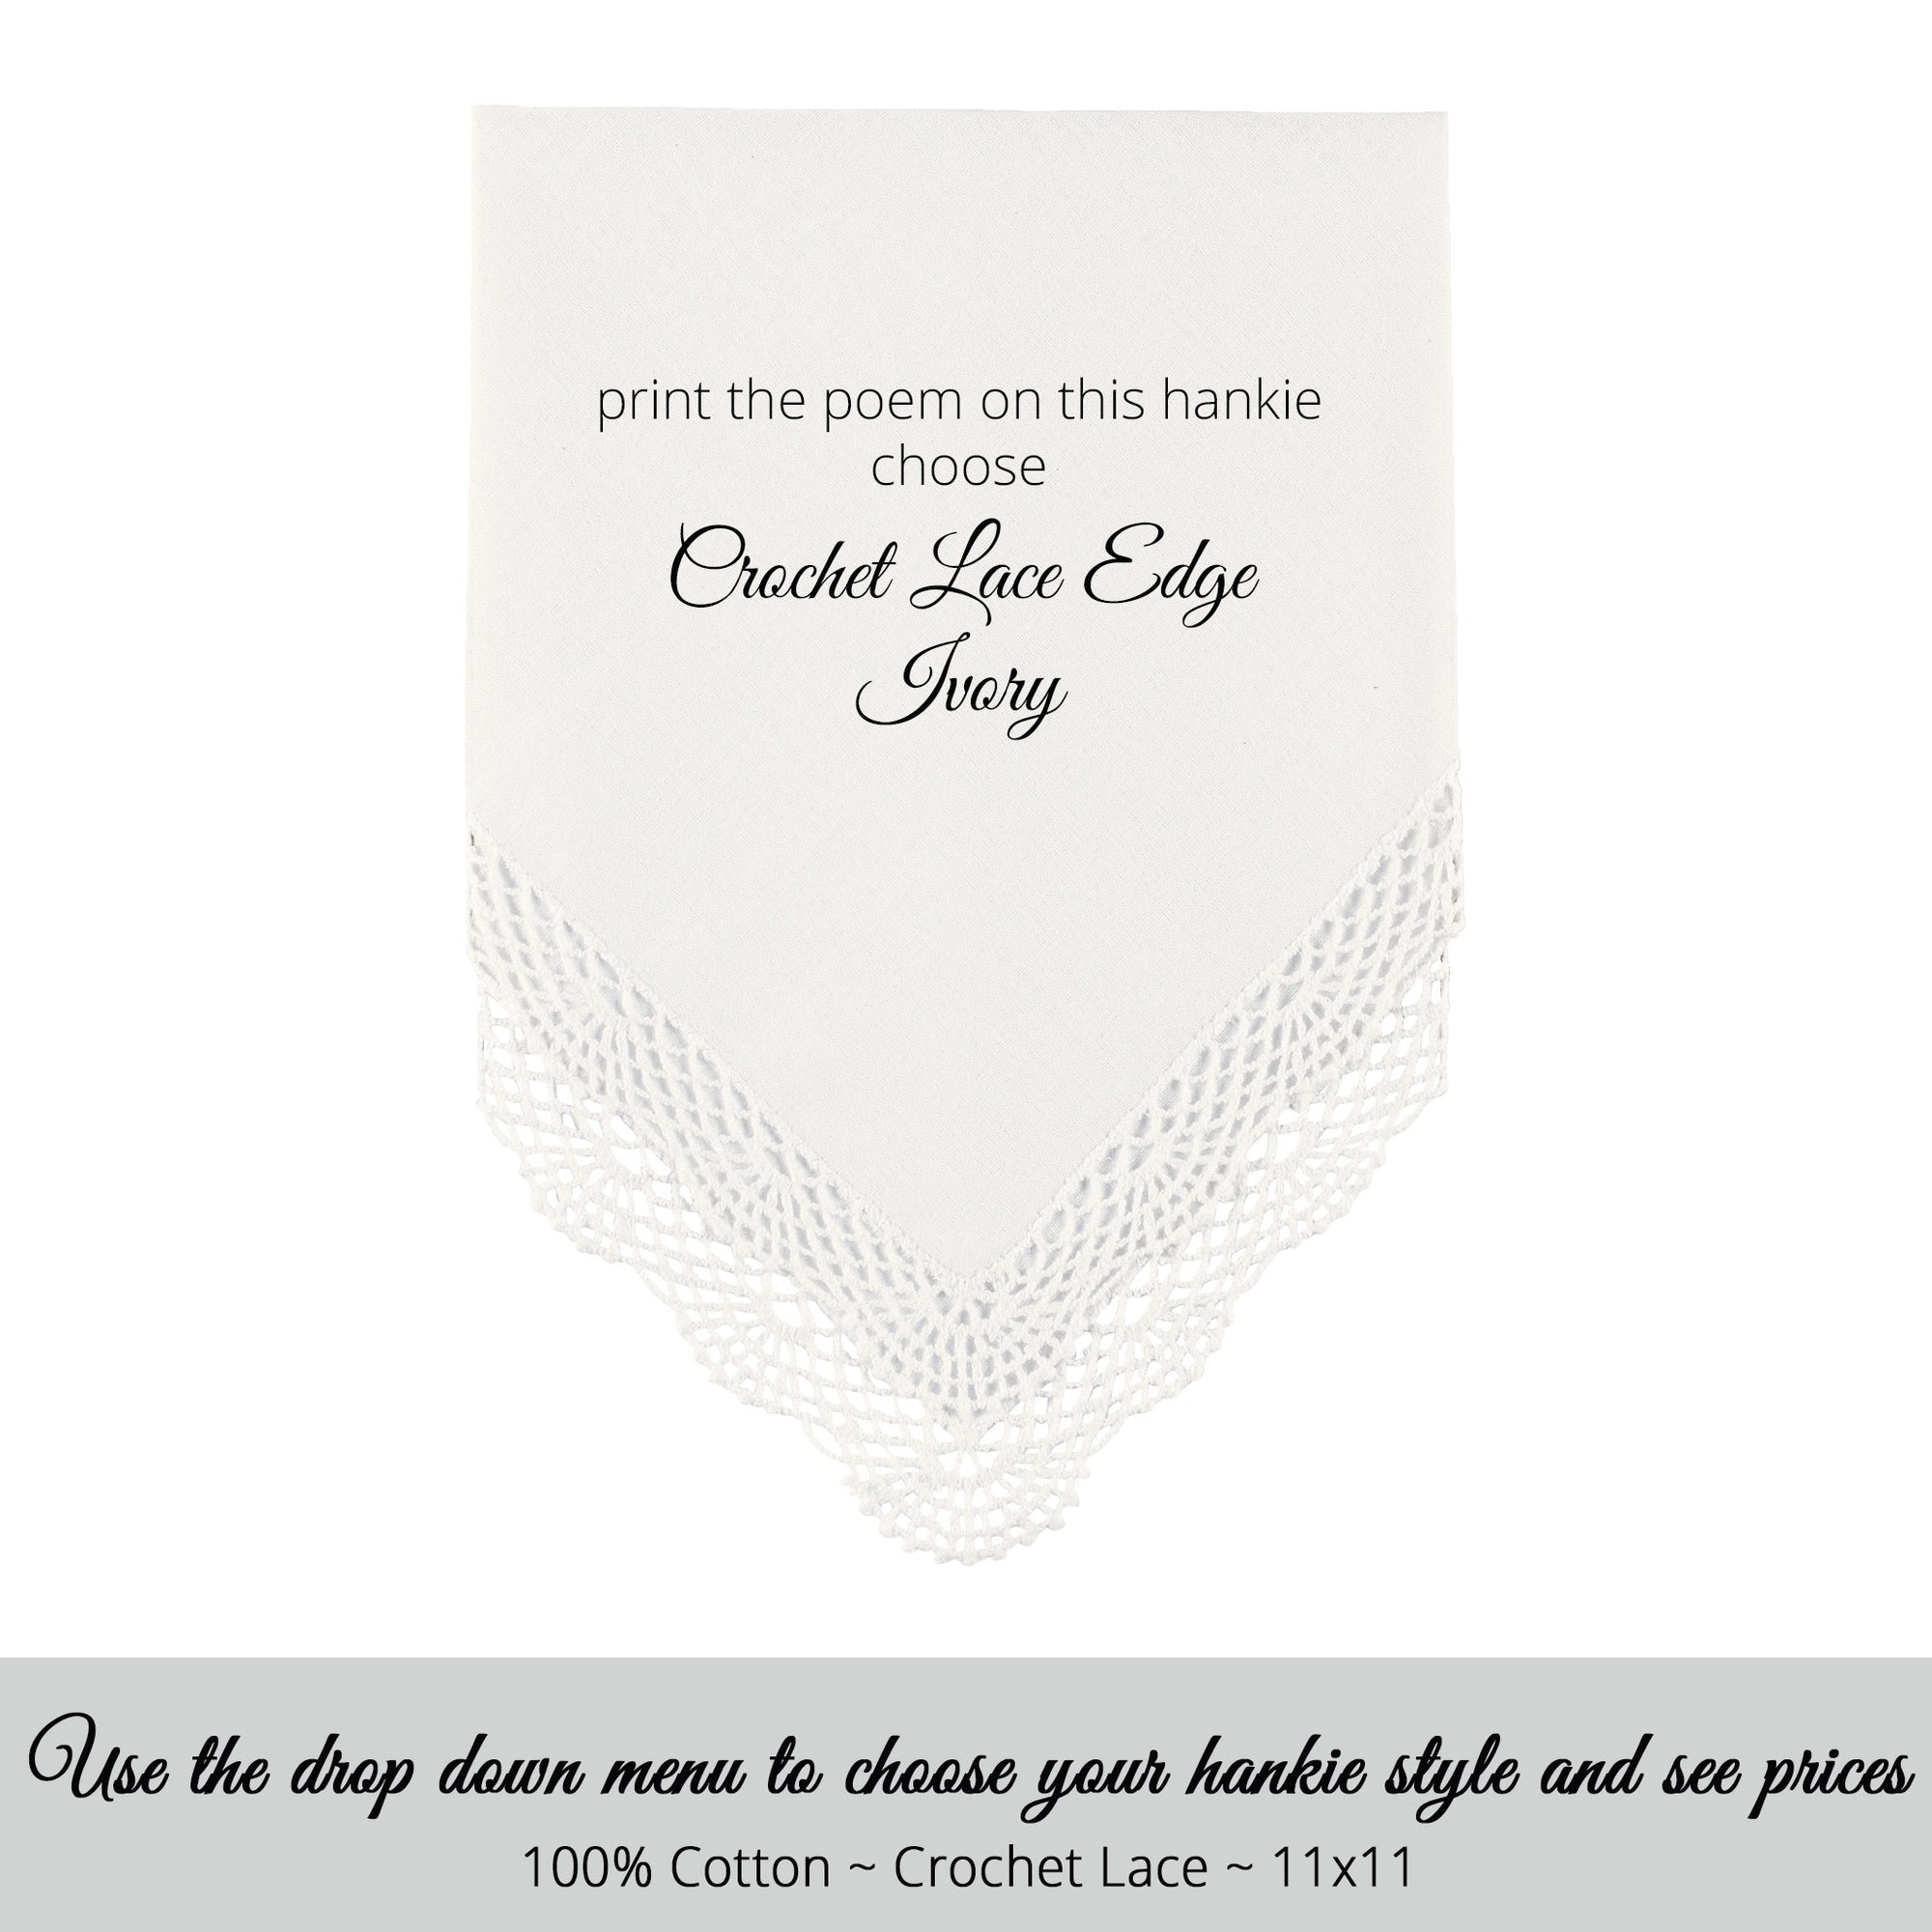 Wedding handkerchief ivory with crochet lace edge for the mother of the bride printed hankie